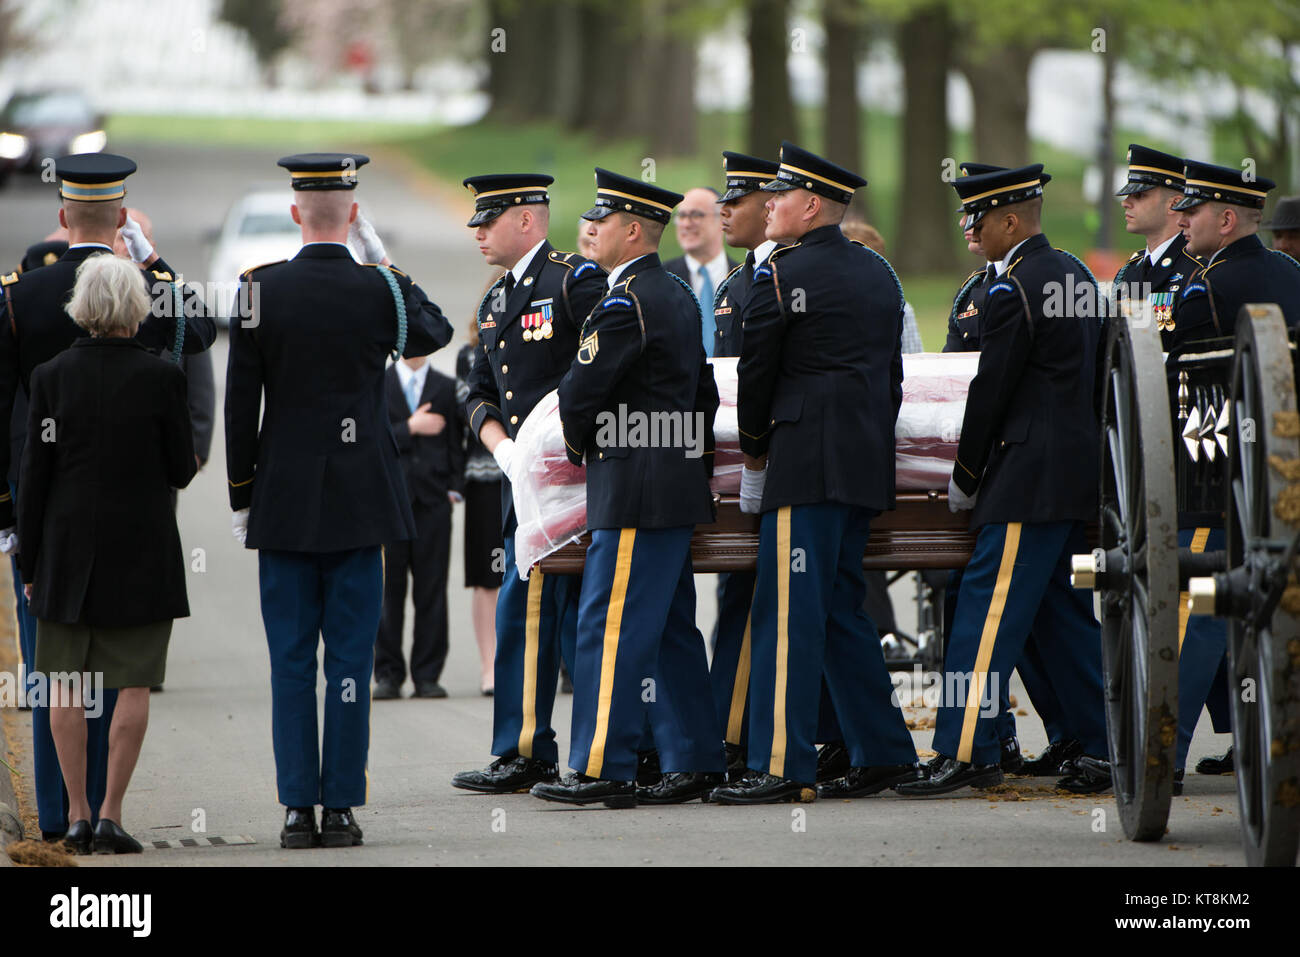 Members of the 3d U.S. Infantry Regiment (The Old Guard) participate in the graveside service for U.S. Army Air Forces 2nd Lt. Marvin B. Rothman, 21, of Cleveland Heights, Ohio, at Arlington National Cemetery, April 19, 2017, in Arlington, Va. Rothman went missing during a bombing escort mission, April 11, 1944, flying a P-47D Thunderbolt over New Guinea. His remains were recently found and identified. (U.S. Army photo by Rachel Larue/Arlington National Cemetery/released) Stock Photo